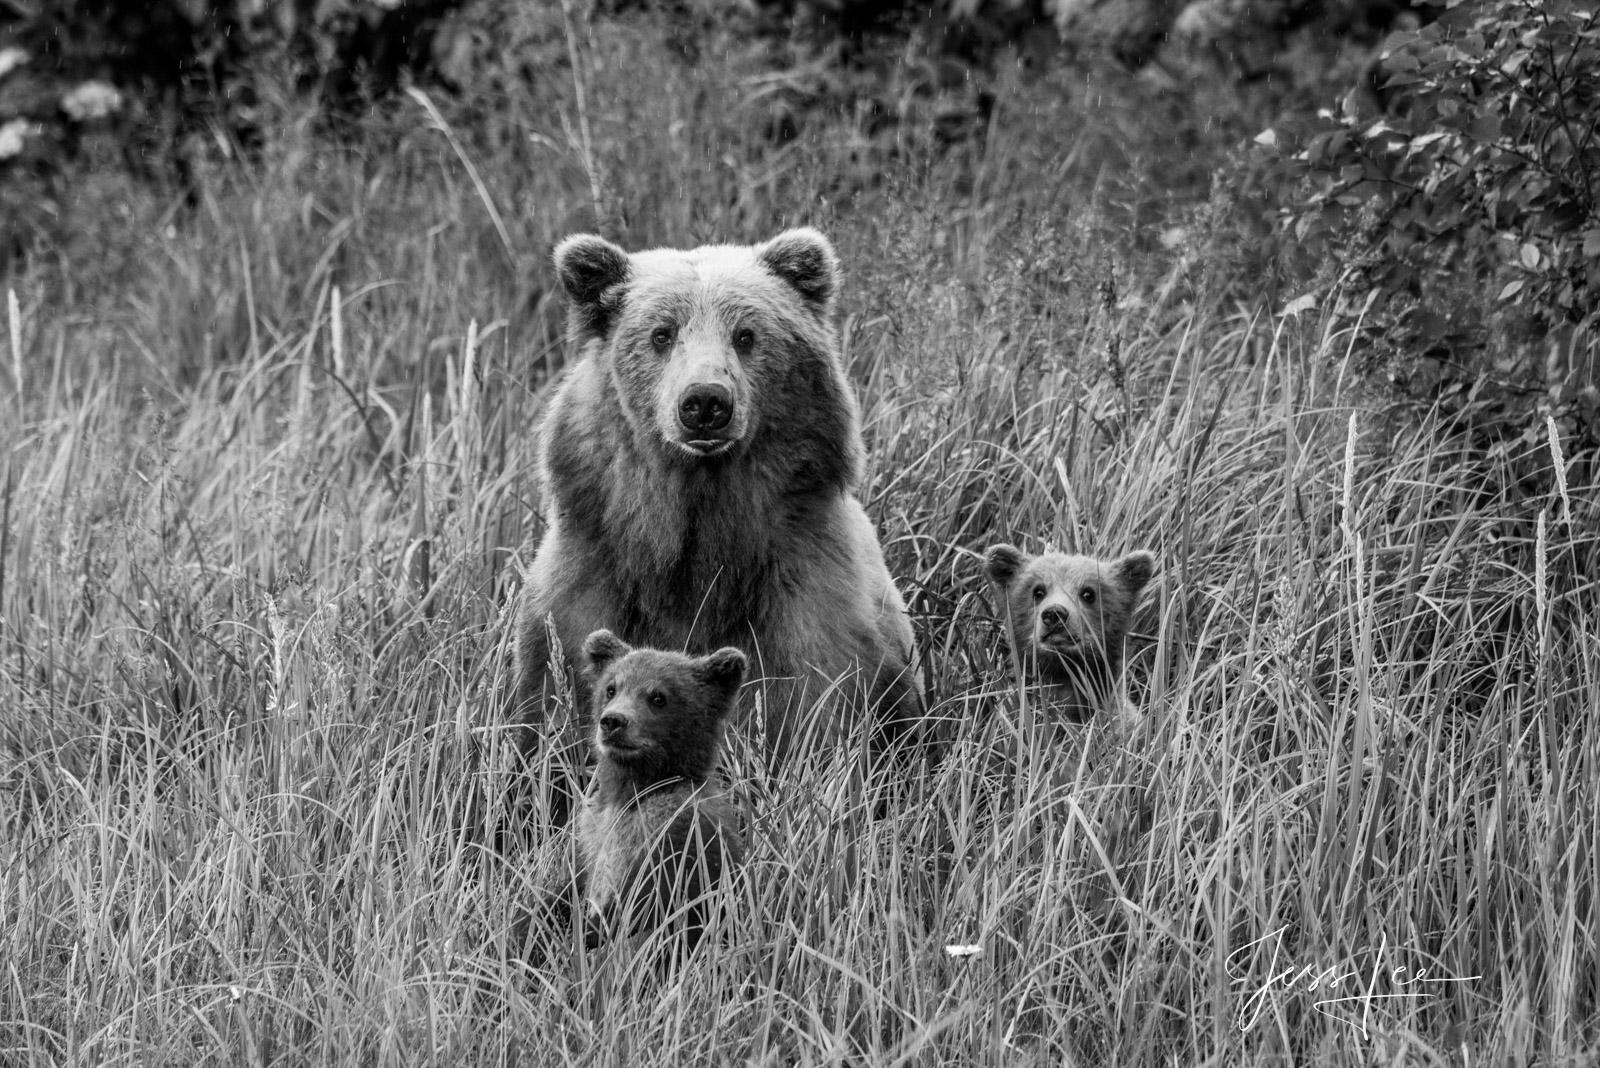 Grizzly Mom and Cubs